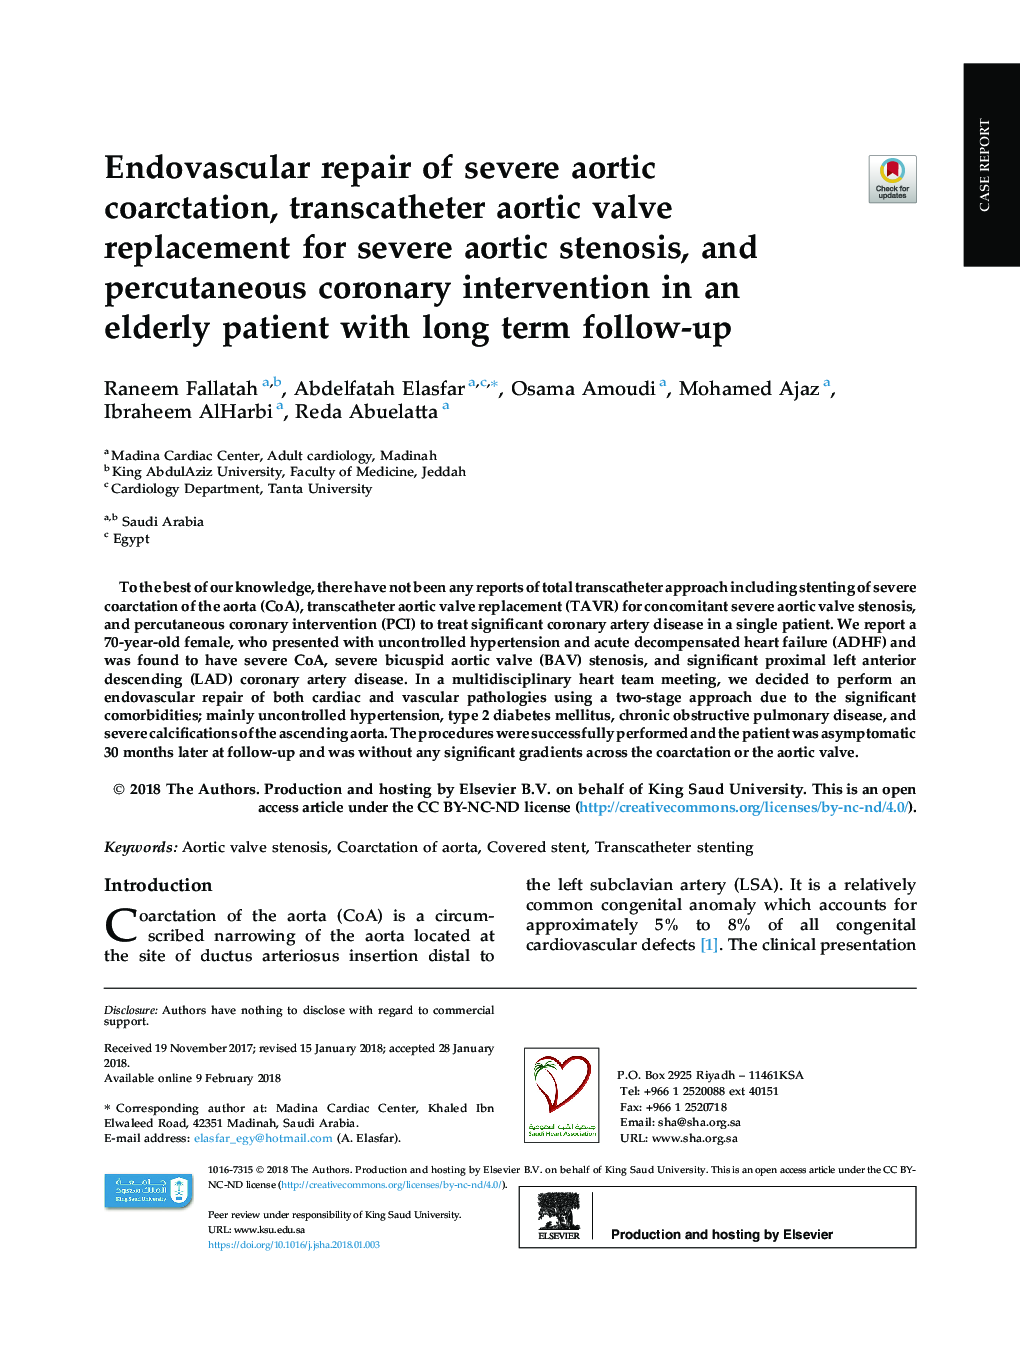 Endovascular repair of severe aortic coarctation, transcatheter aortic valve replacement for severe aortic stenosis, and percutaneous coronary intervention in an elderly patient with long term follow-up